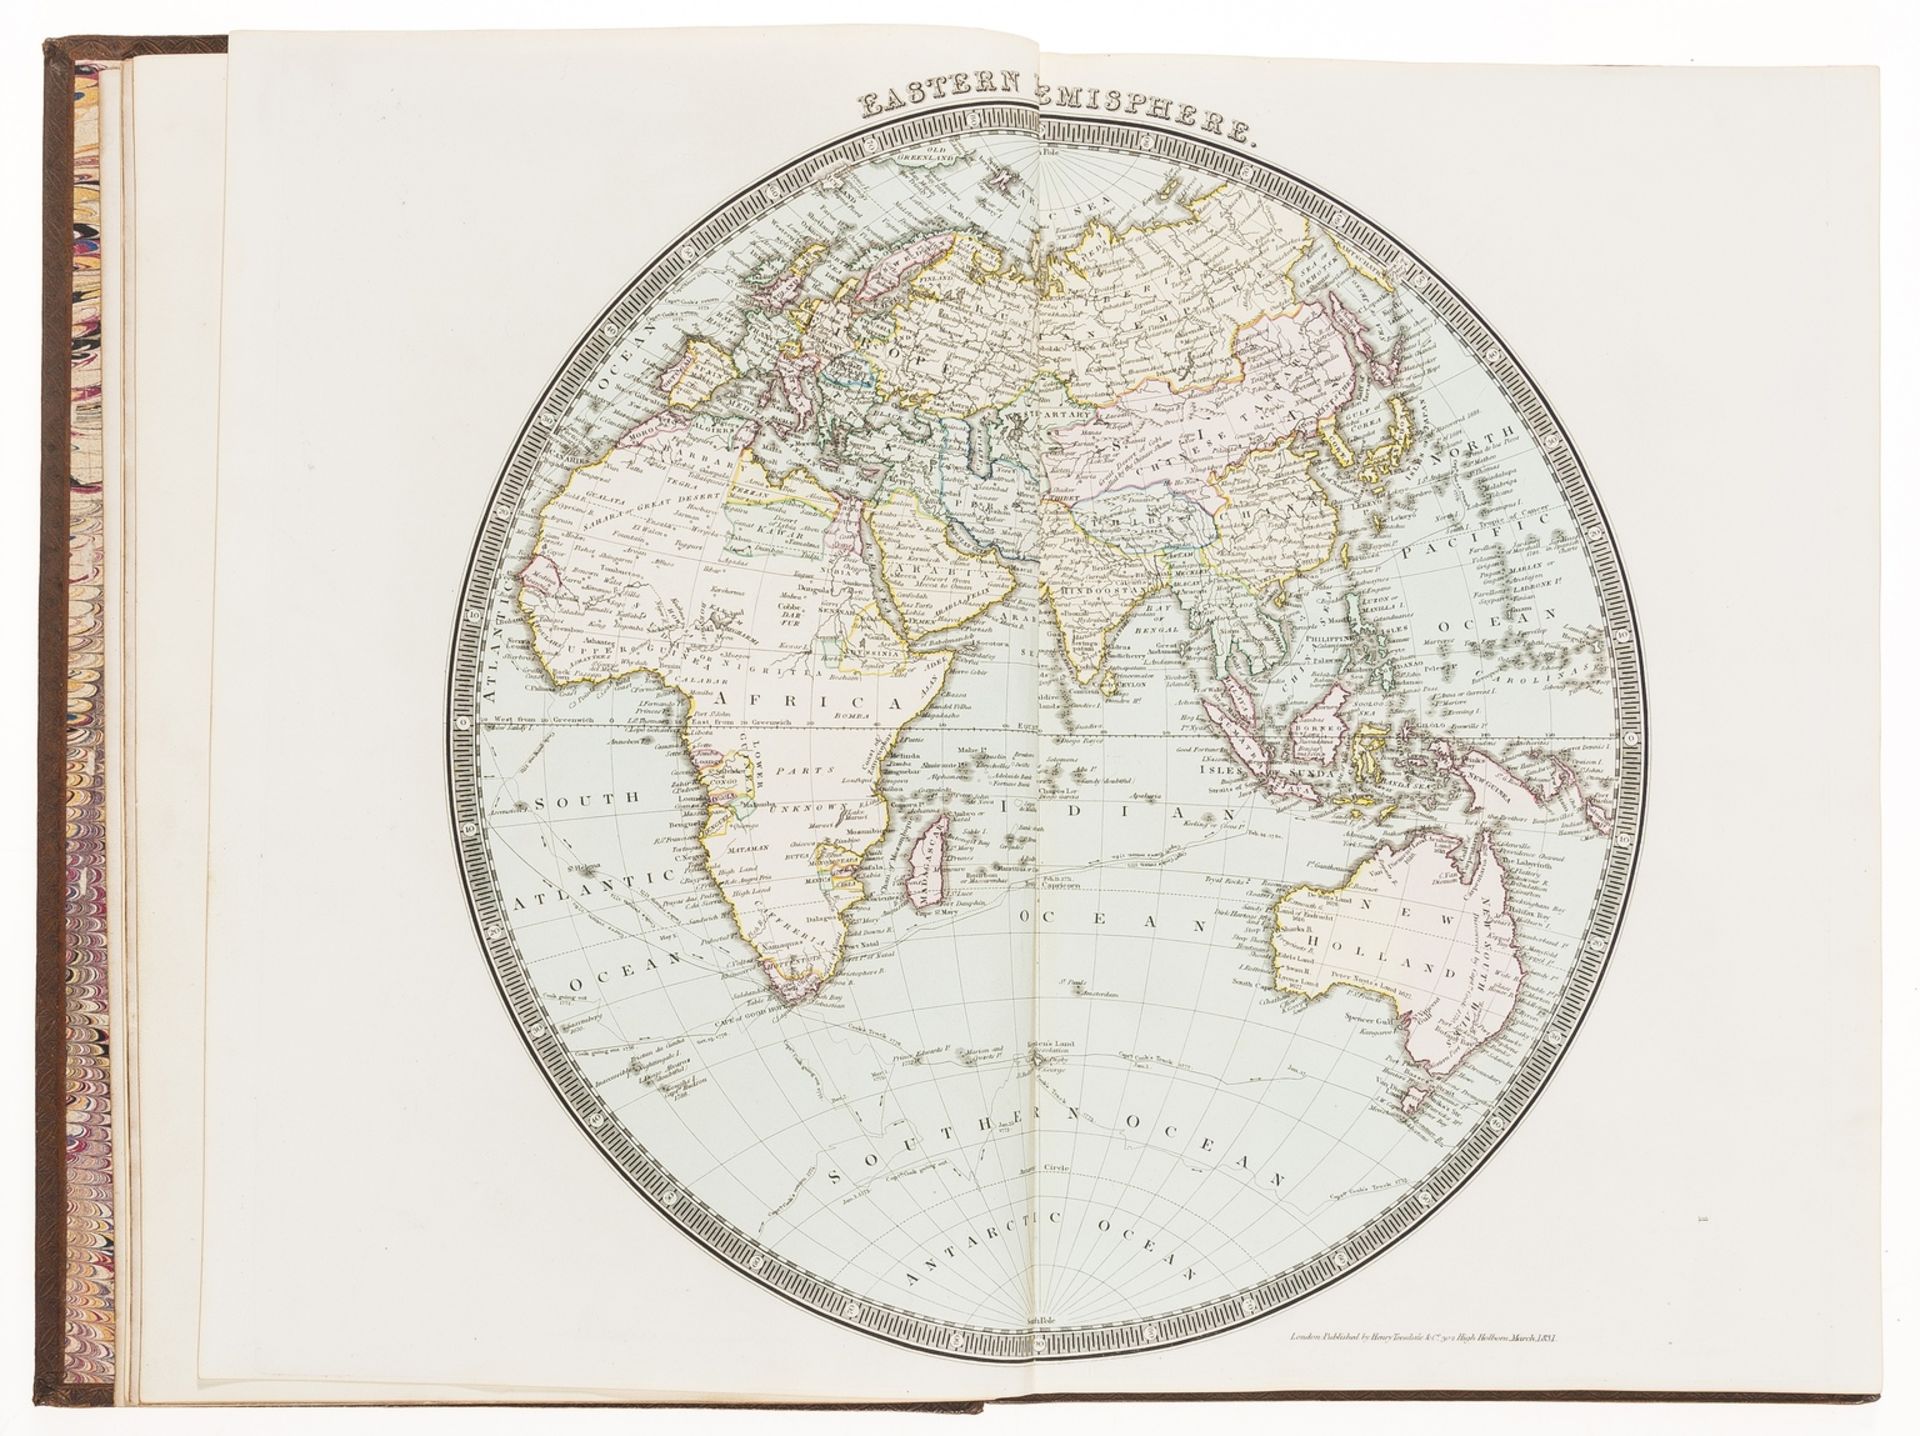 Atlases.- Teesdale (Henry, publisher) A New General Atlas of the World, handsomely bound, 1832. - Image 4 of 5